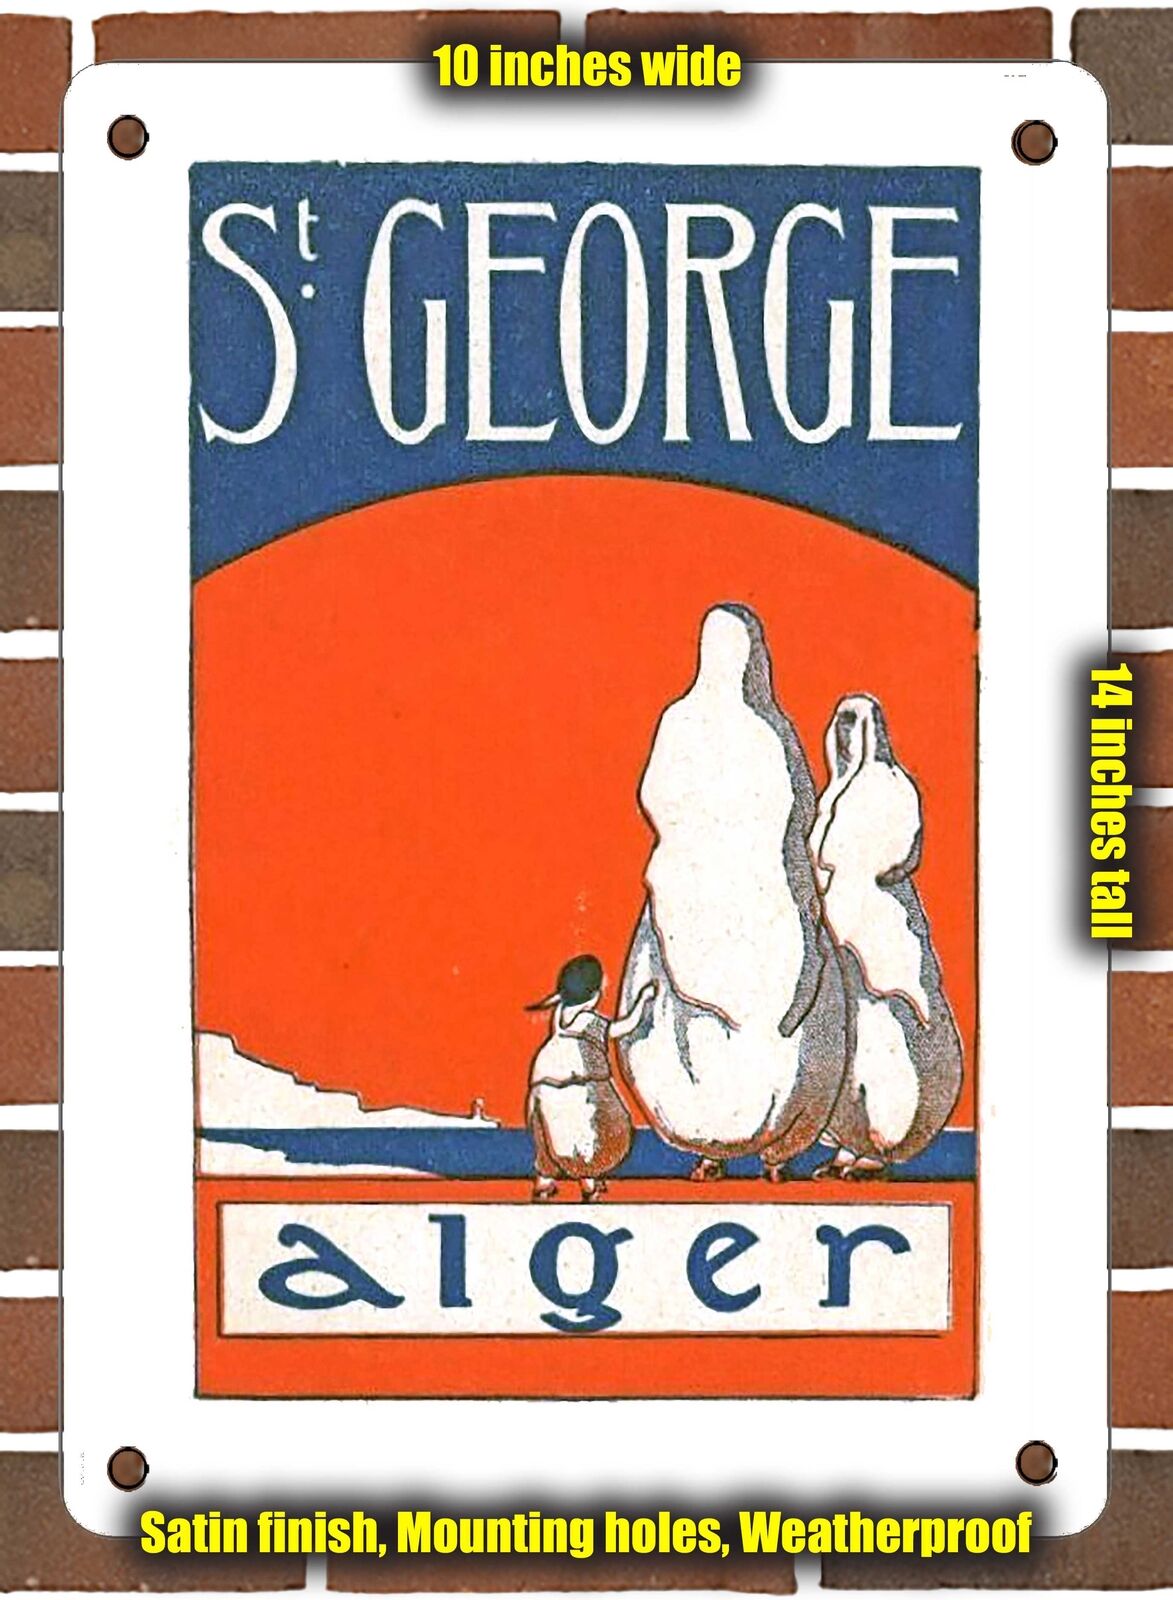 METAL SIGN - 1920 St. George Alger - 10x14 Inches